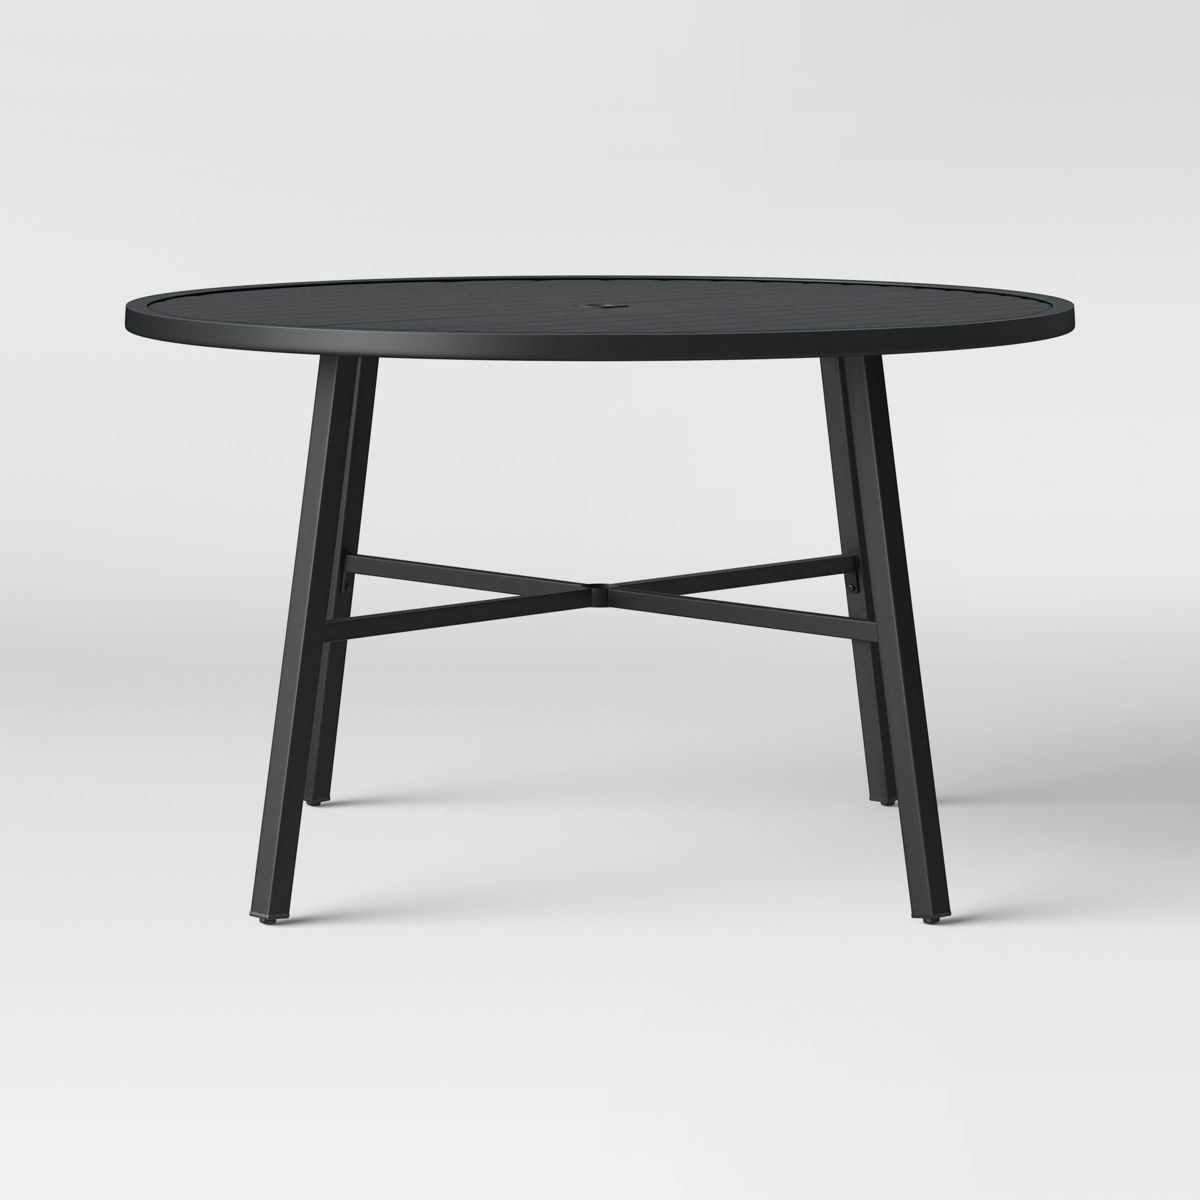 Fairmont 4-Person Round Patio Dining Table Black - Threshold™ | Target